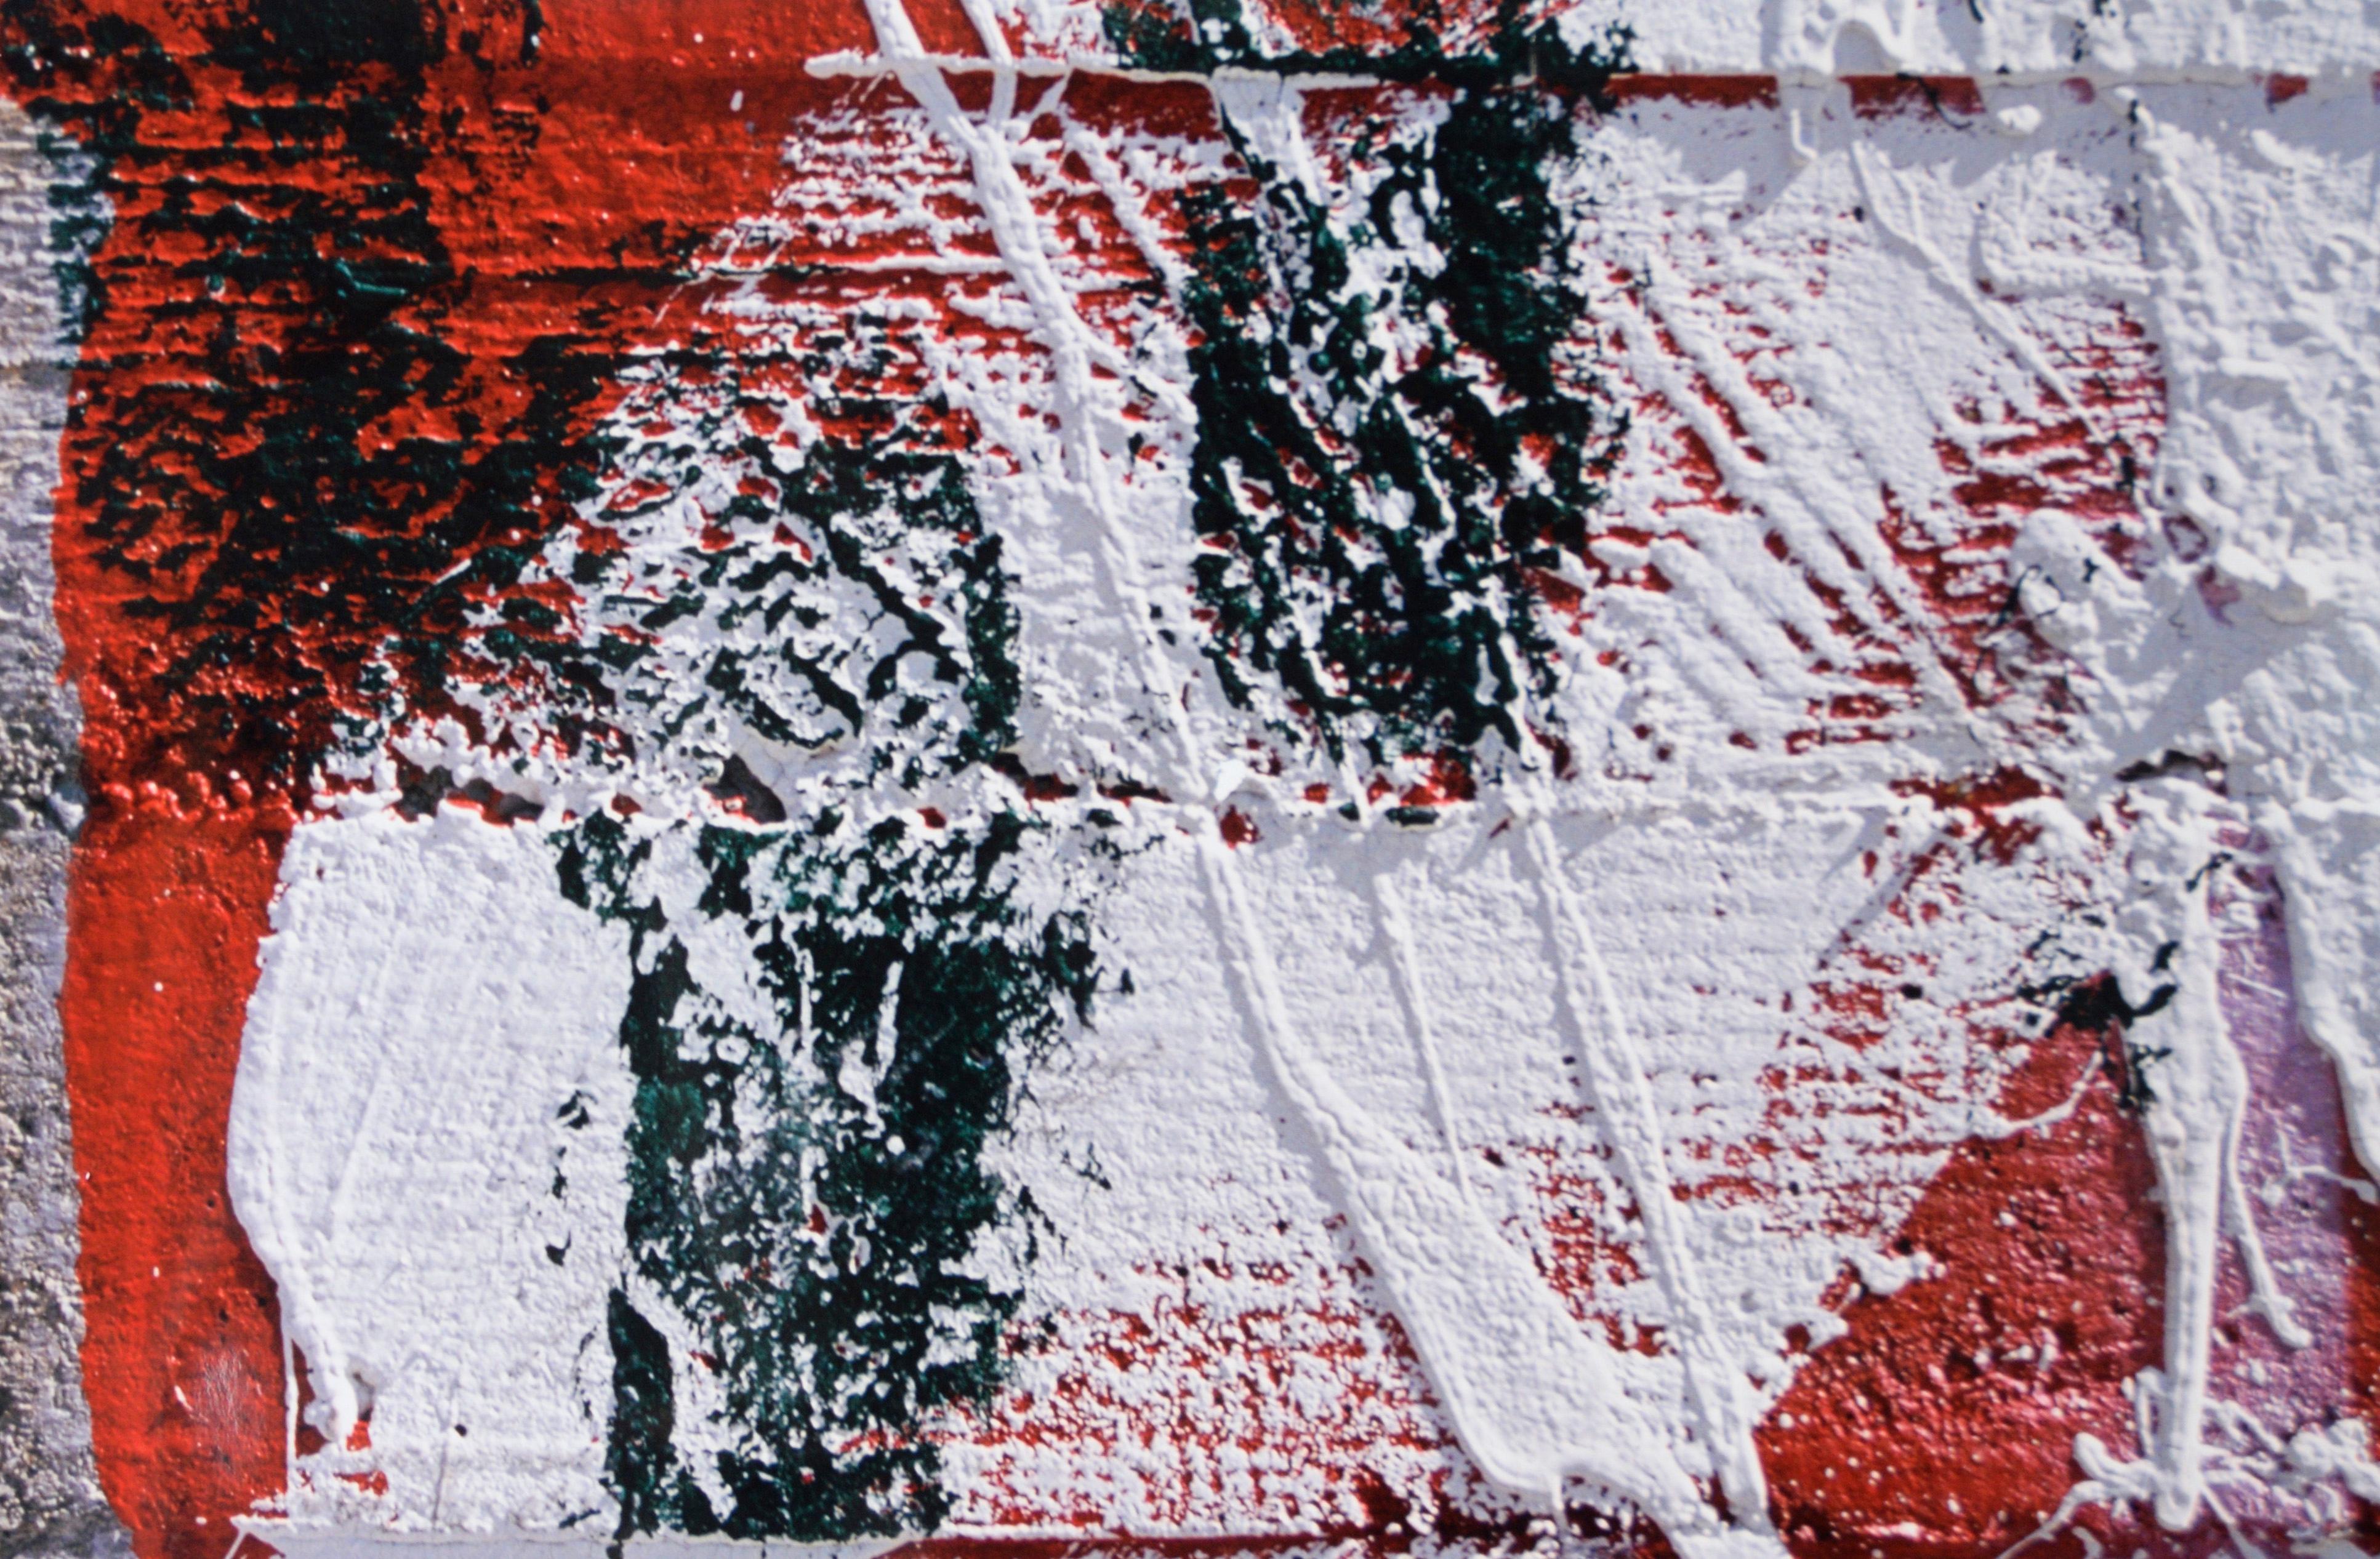 White Paint Splatters - Large Scale Textural Photograph

Detailed macro photo by Bill Clark (American, 20th Century). Clark has taken a photograph of heavily painted concrete, with white and green splatters across a red background. The close-up